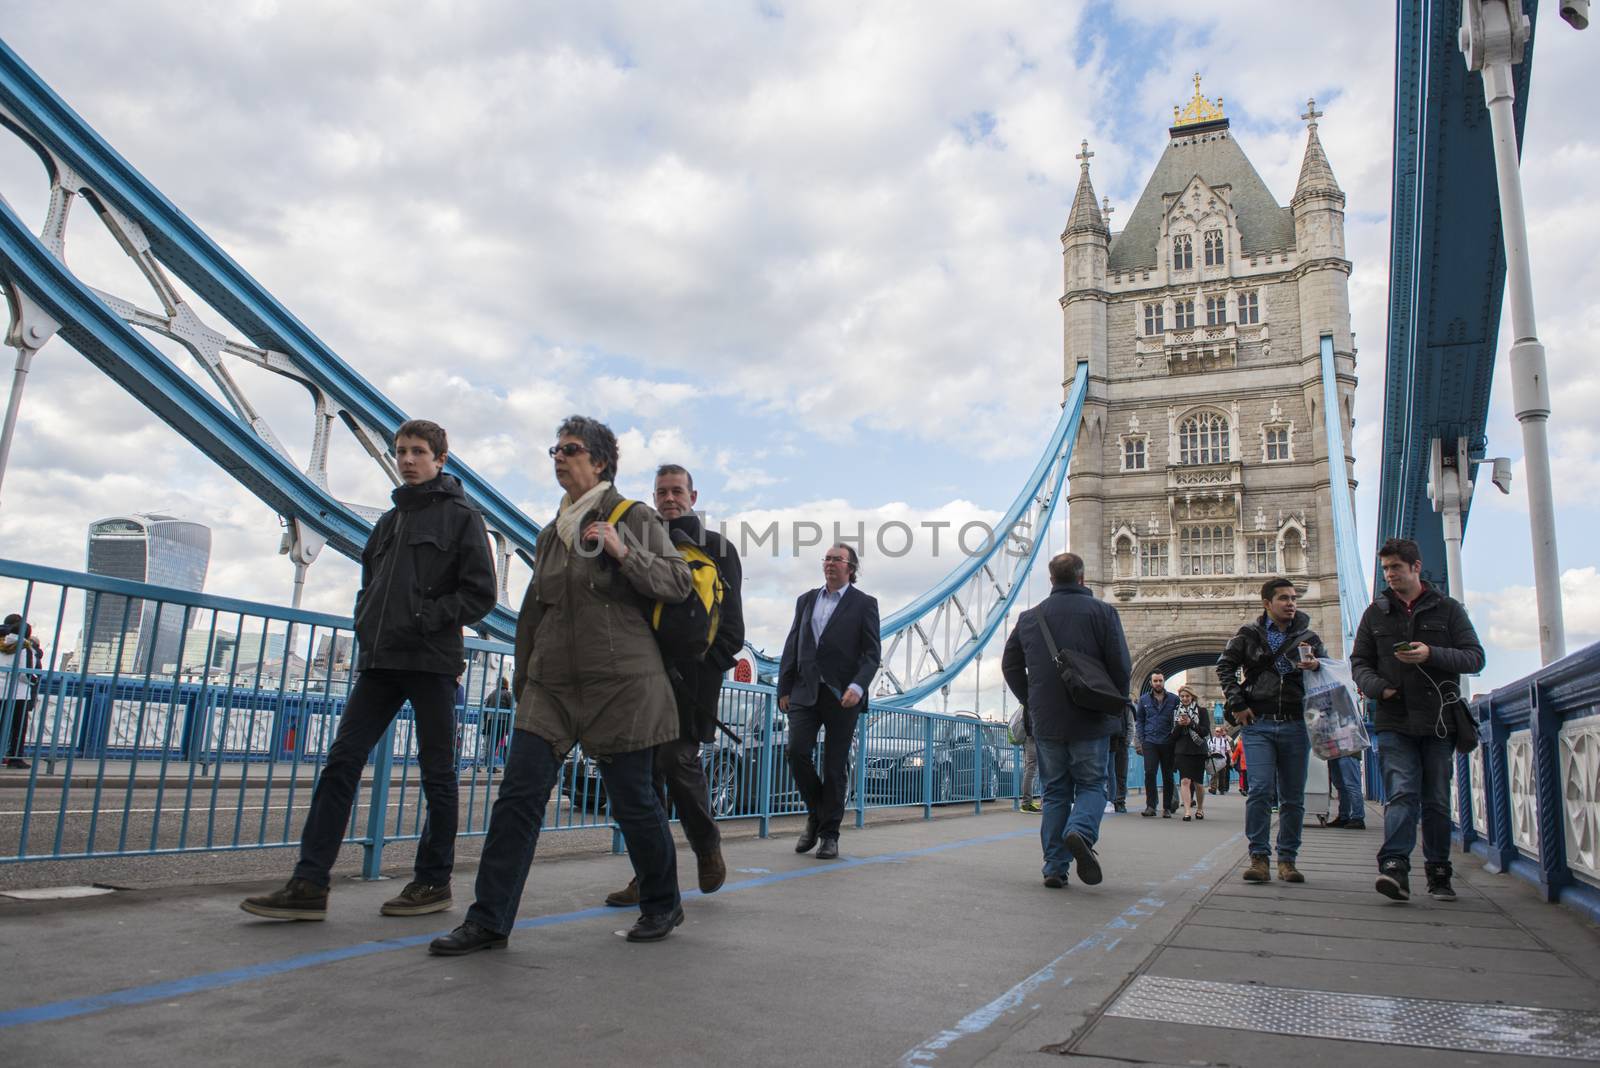 LONDON, UK – APRIL 05 2016: Commuters crossing Tower Bridge during rush hour. Tower Bridge links the South of River Thames to the City area.